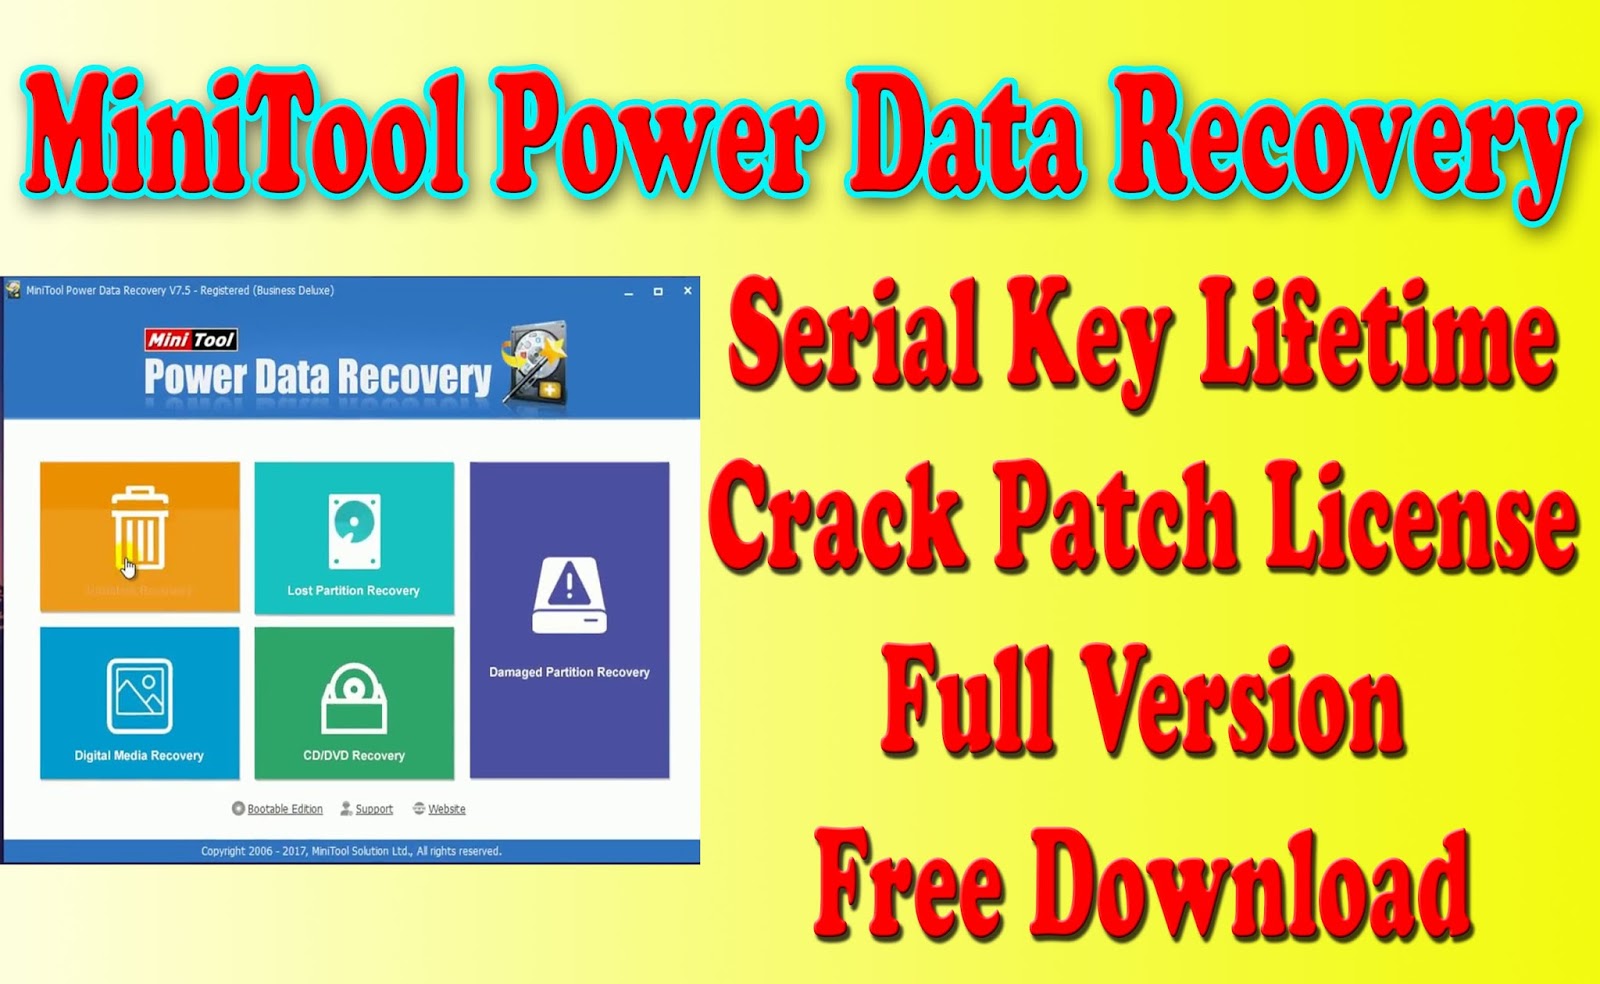 any data recovery licensed email and registration code